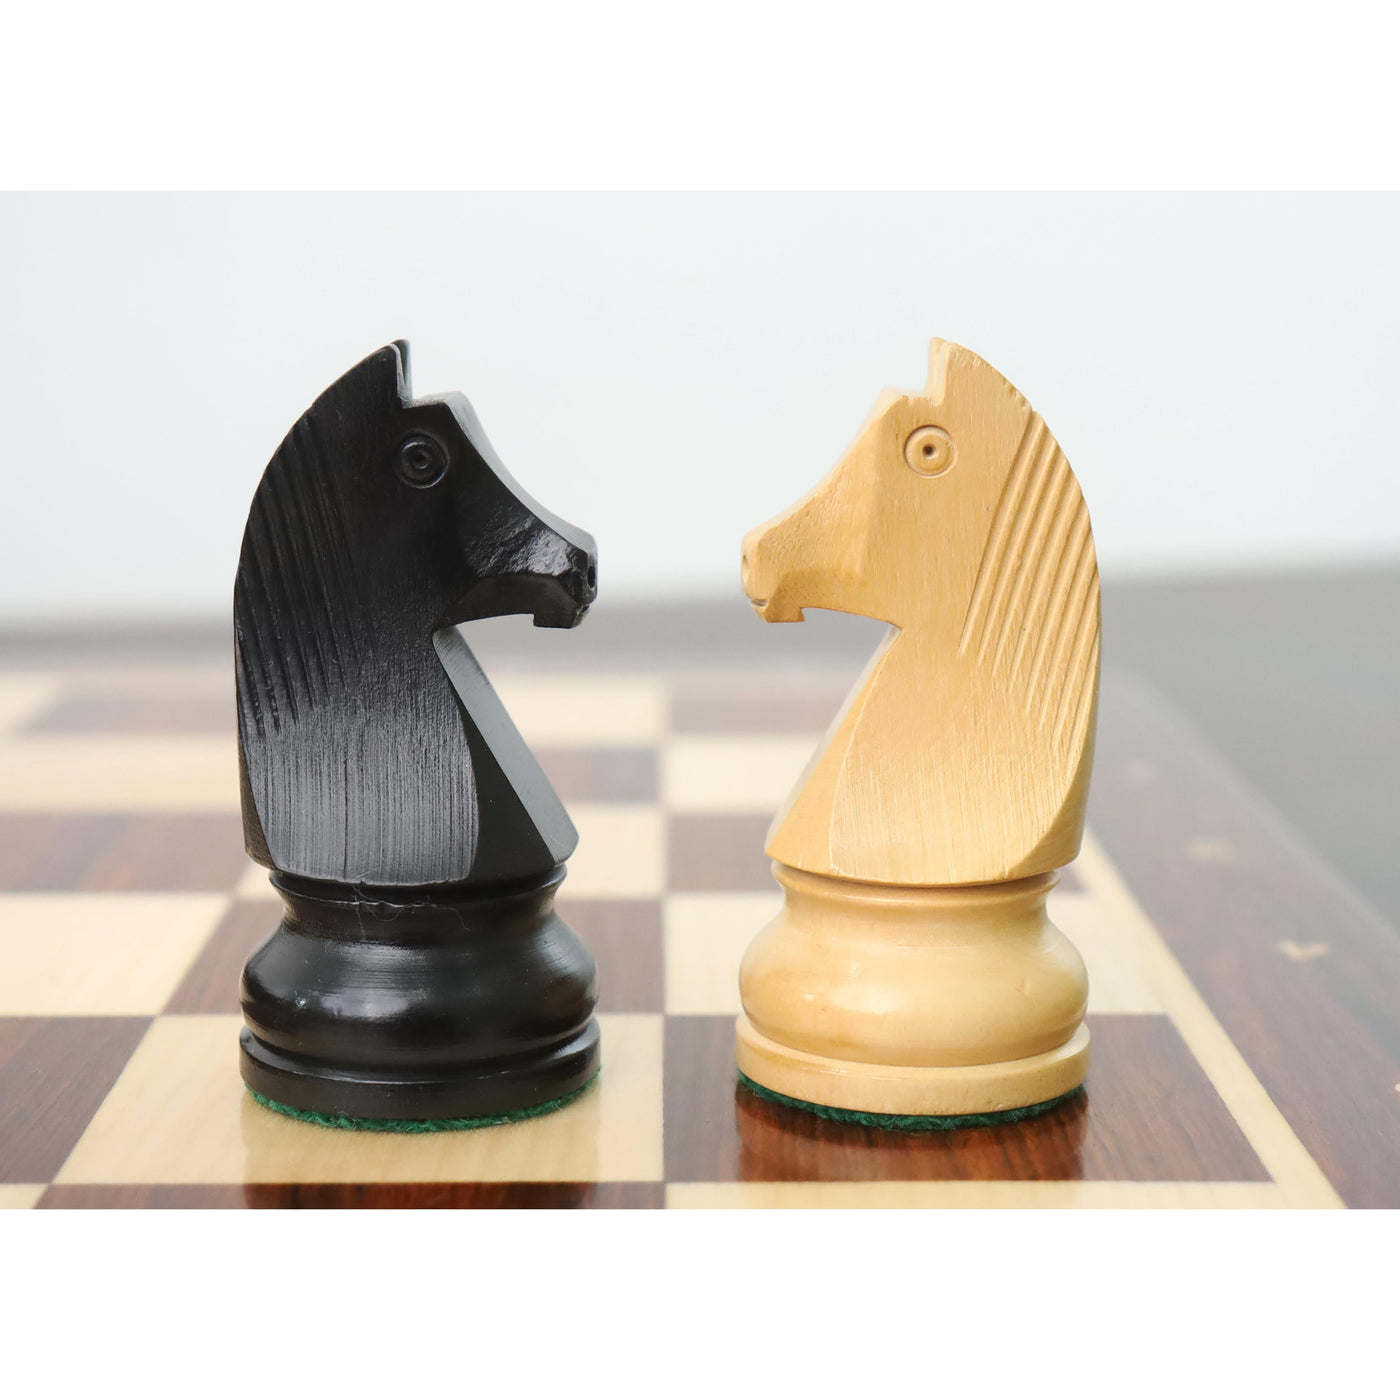 3.9" Championship Chess Set Combo -Pieces in Ebonised boxwood with Board and Box